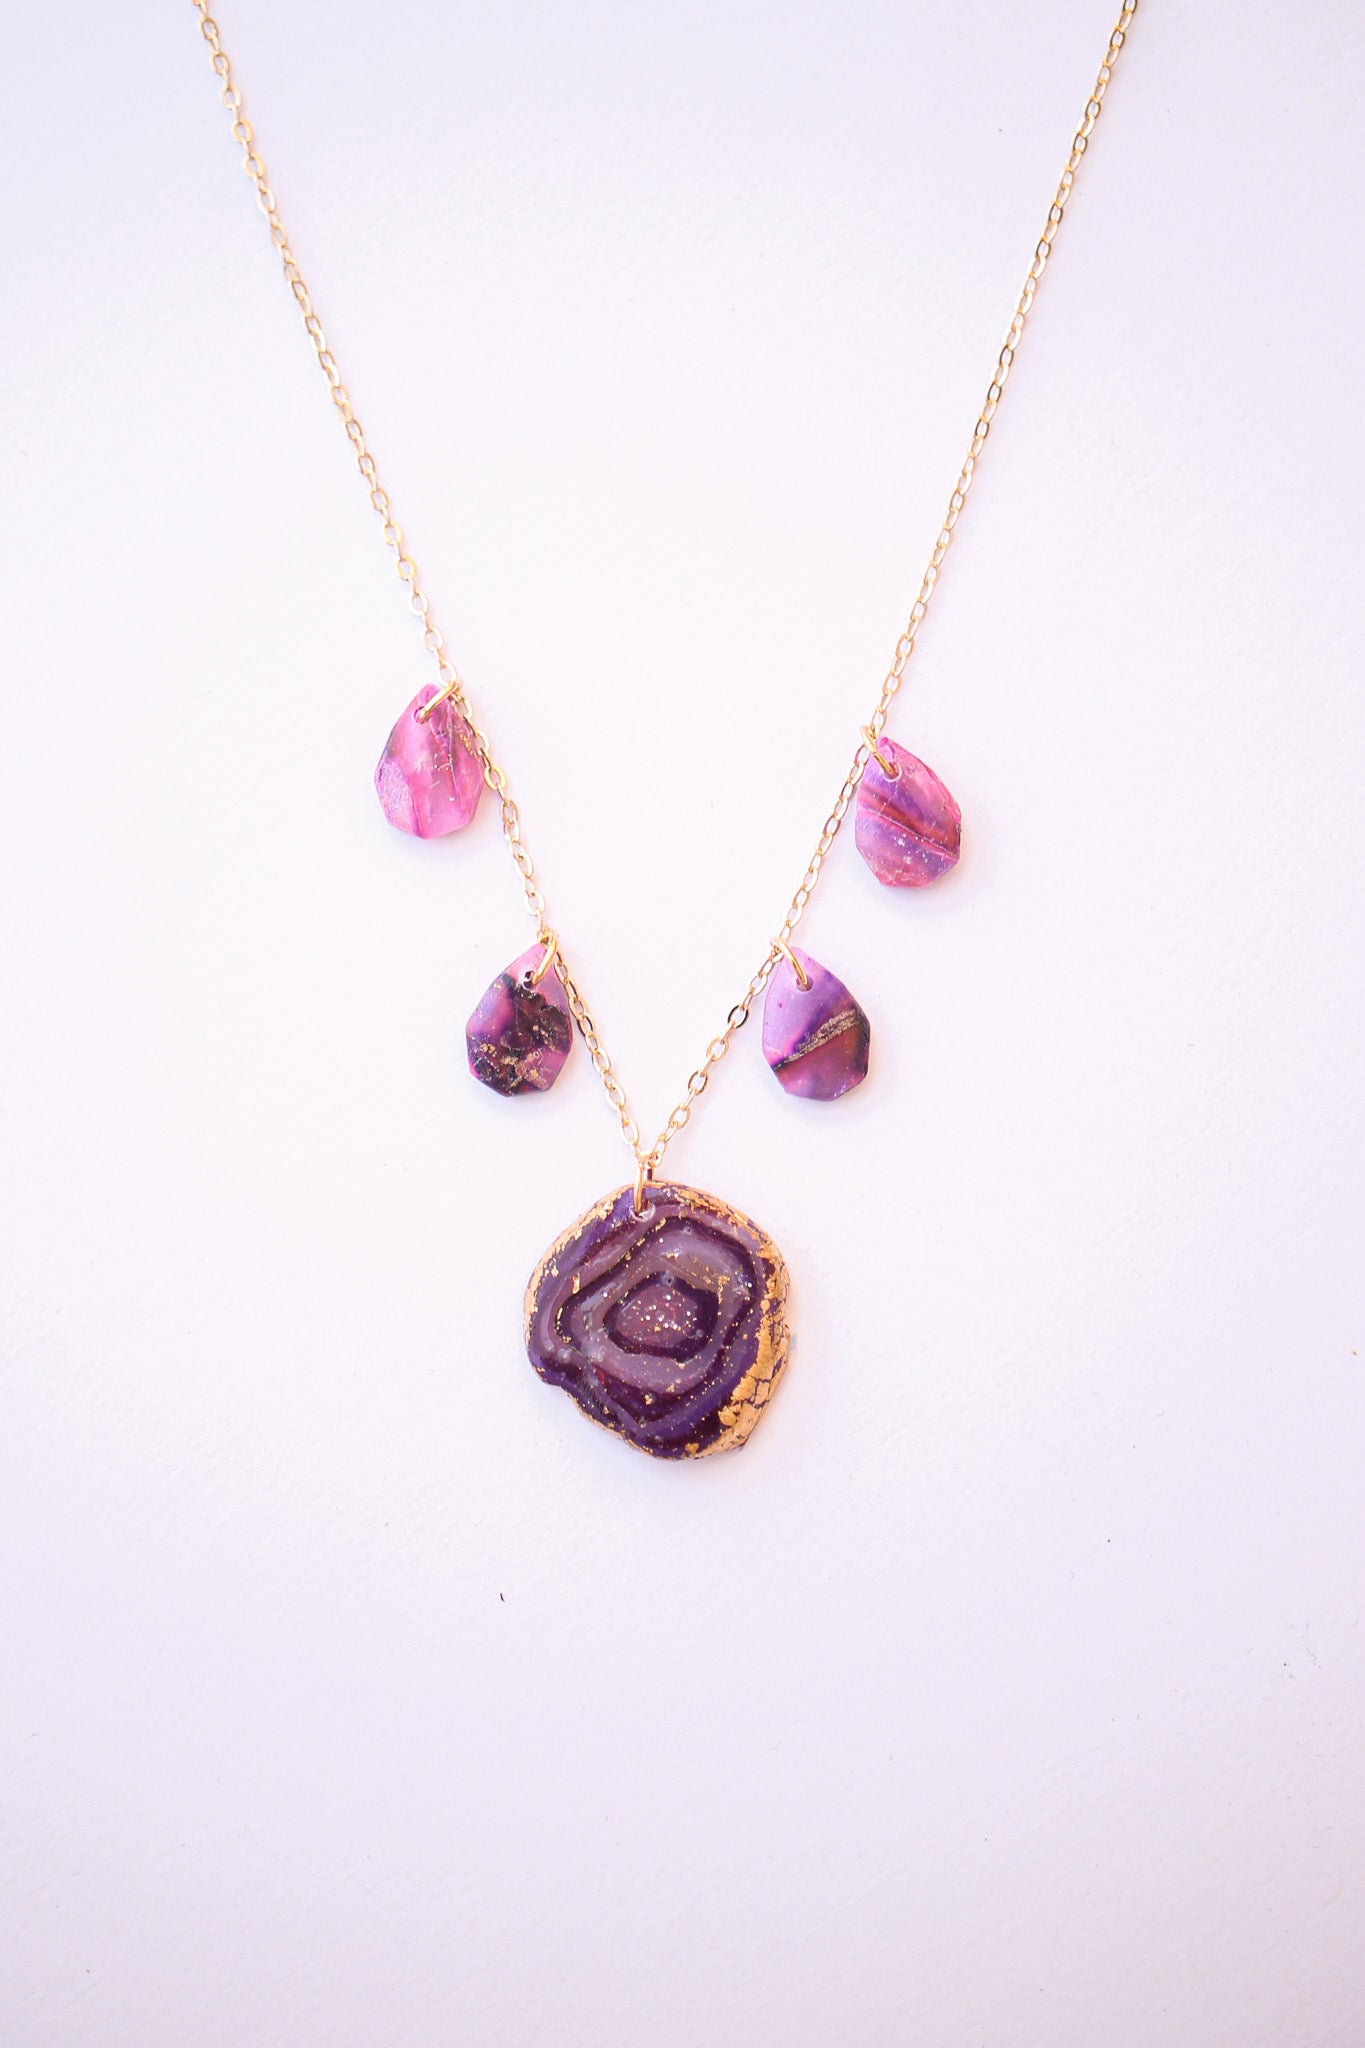 Geode Necklace in Amethyst